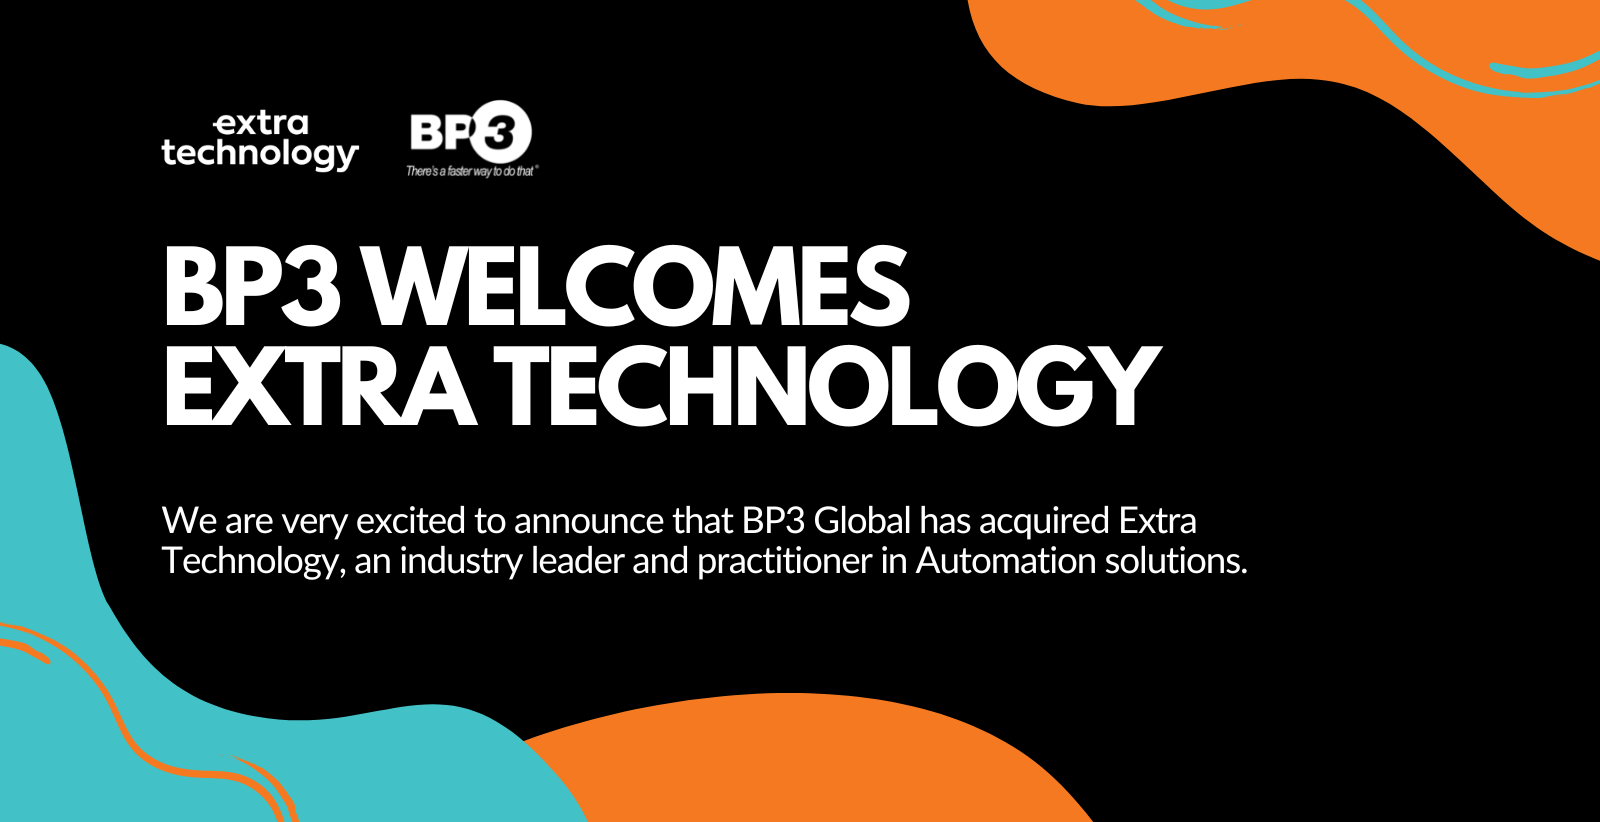 BP3 acquires Extra Technology to bolster position in European and US markets